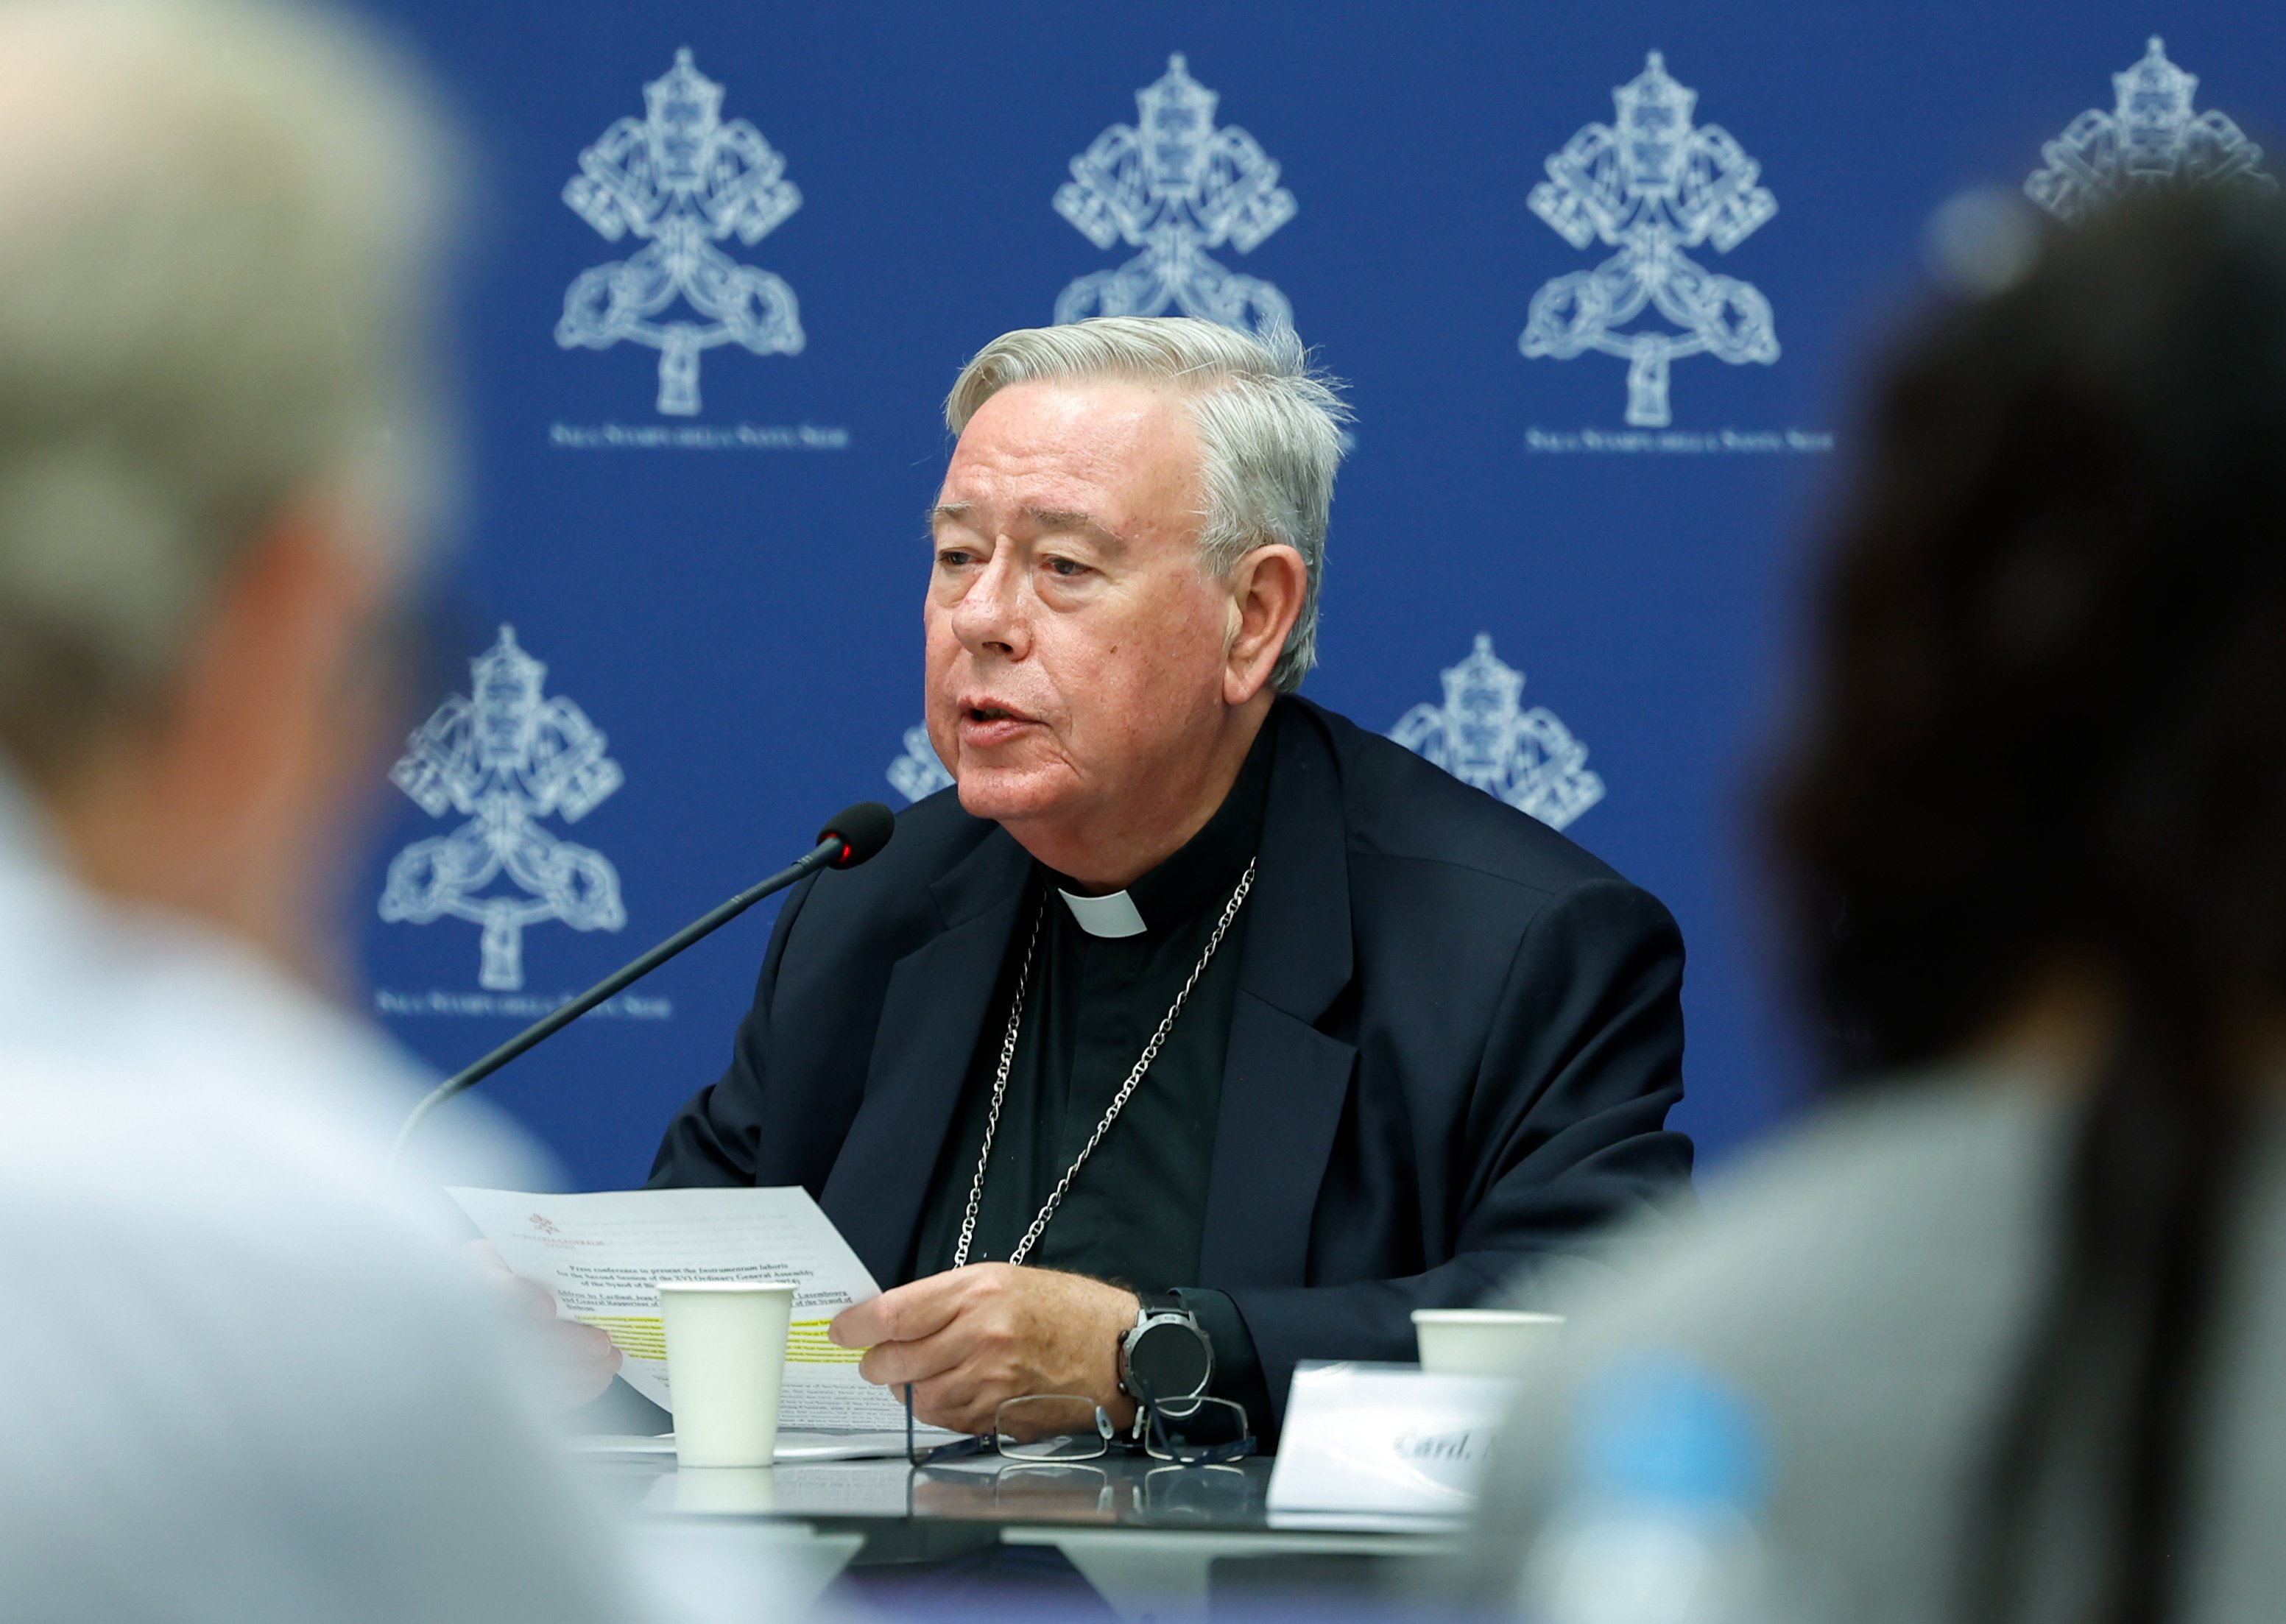 Cardinal Jean-Claude Hollerich, relator general of the synod, speaks during a news conference at the Vatican.